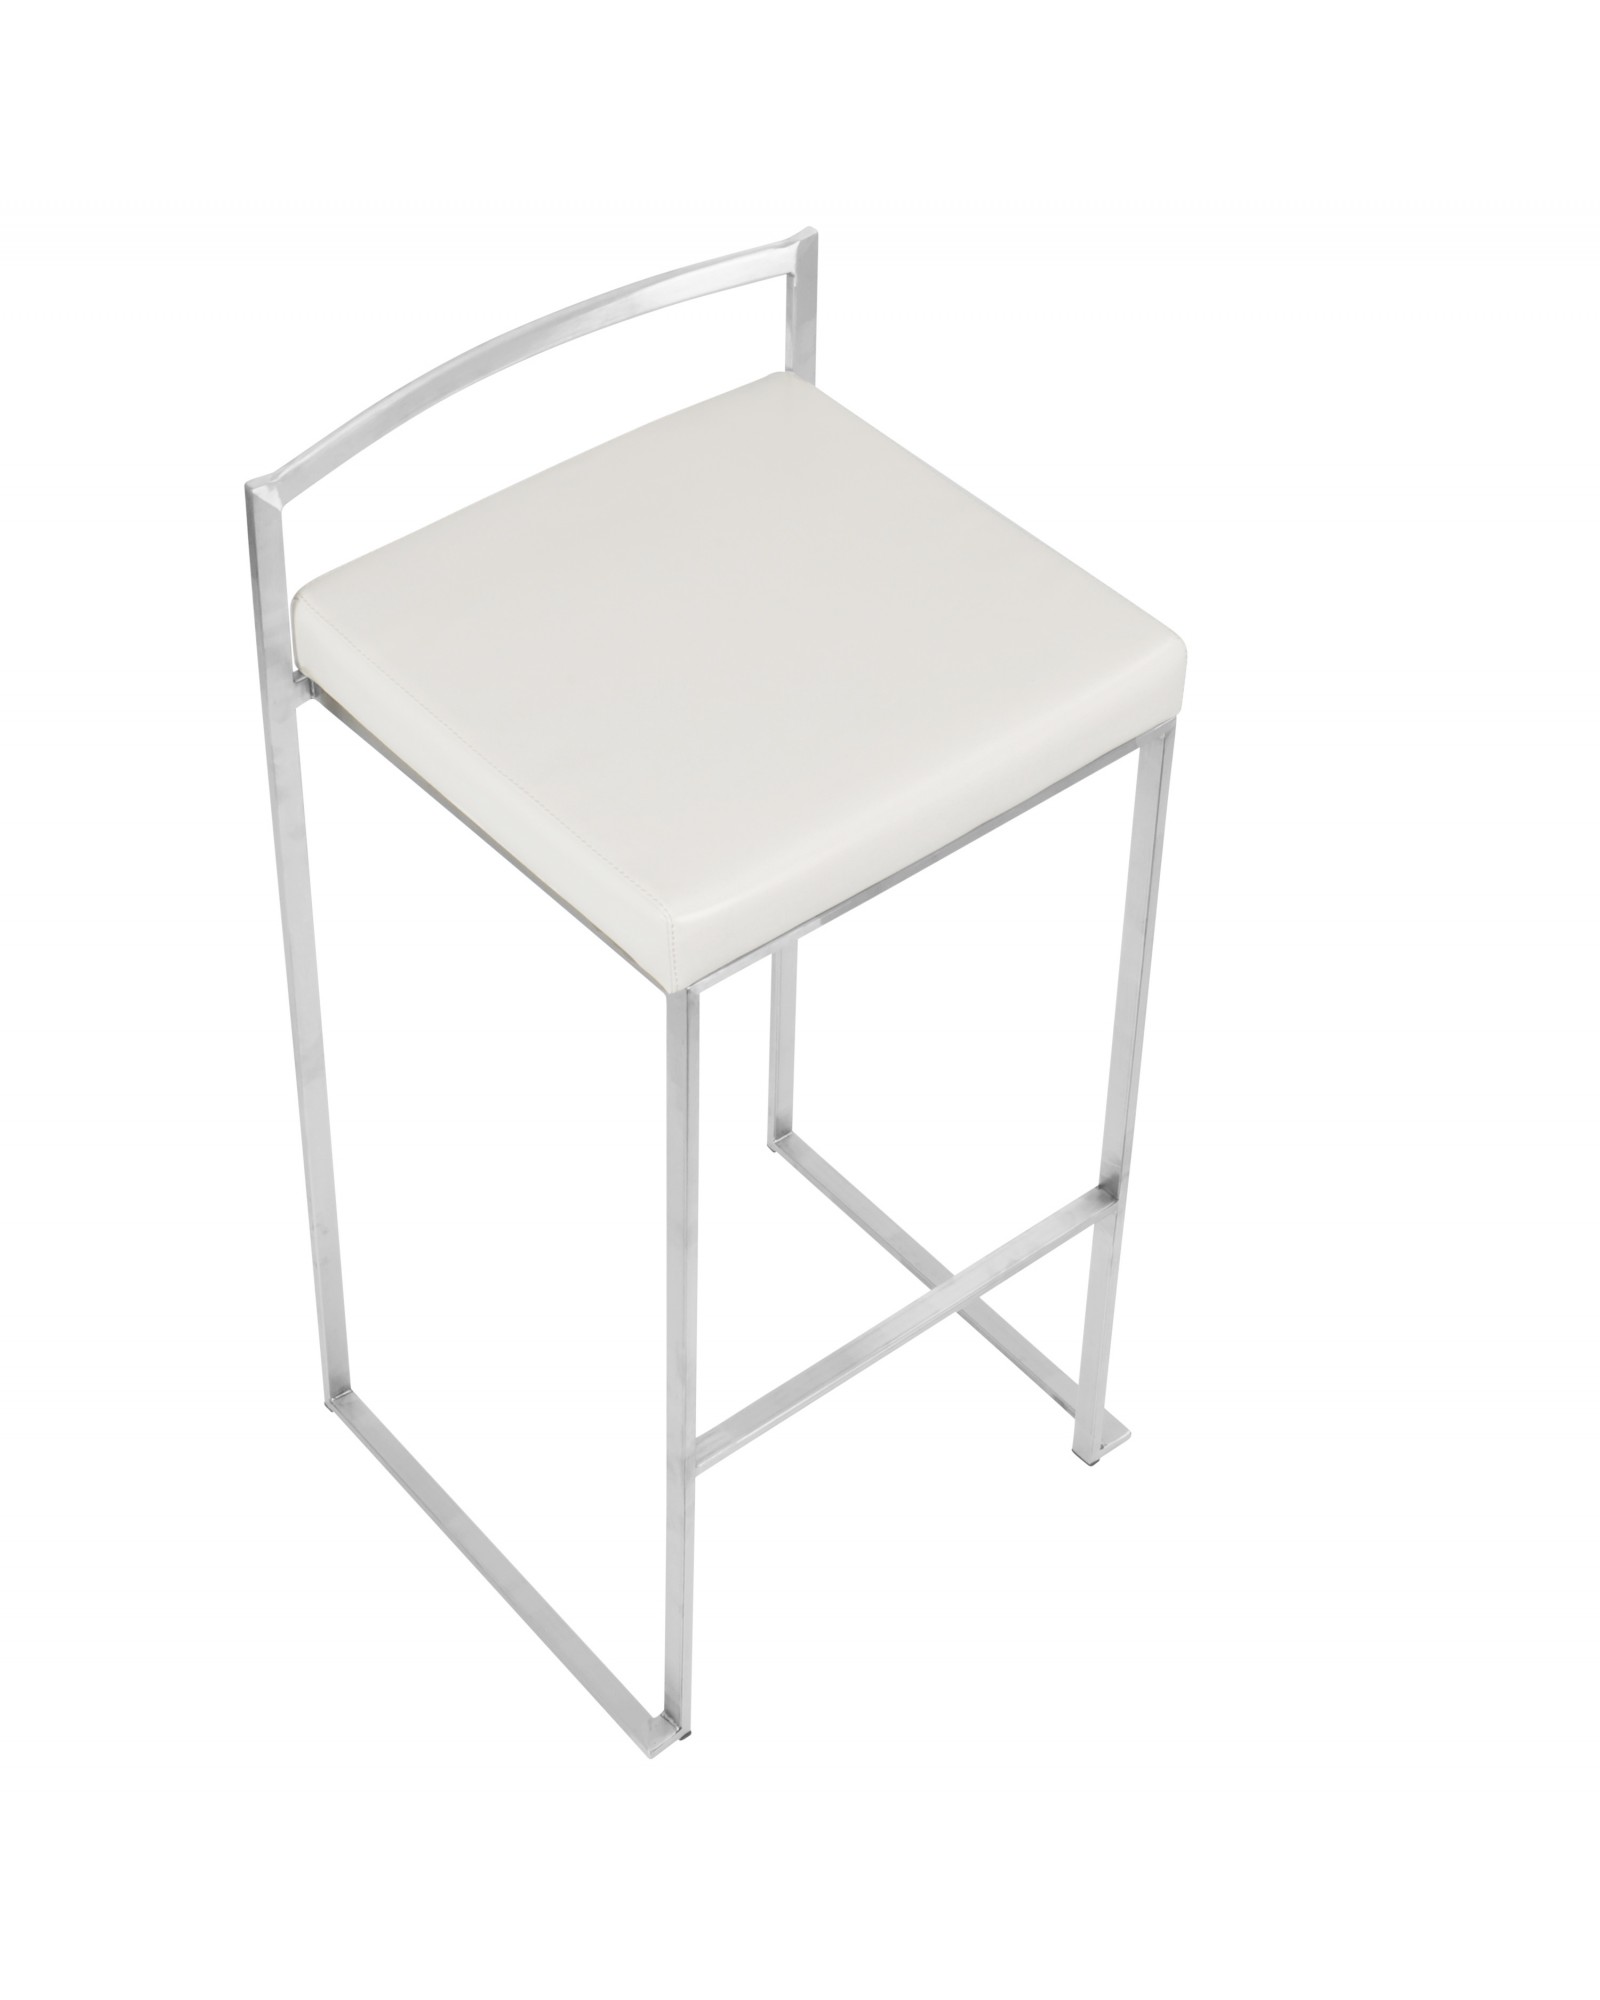 Fuji Contemporary Stackable Barstool with White Faux Leather - Set of 2